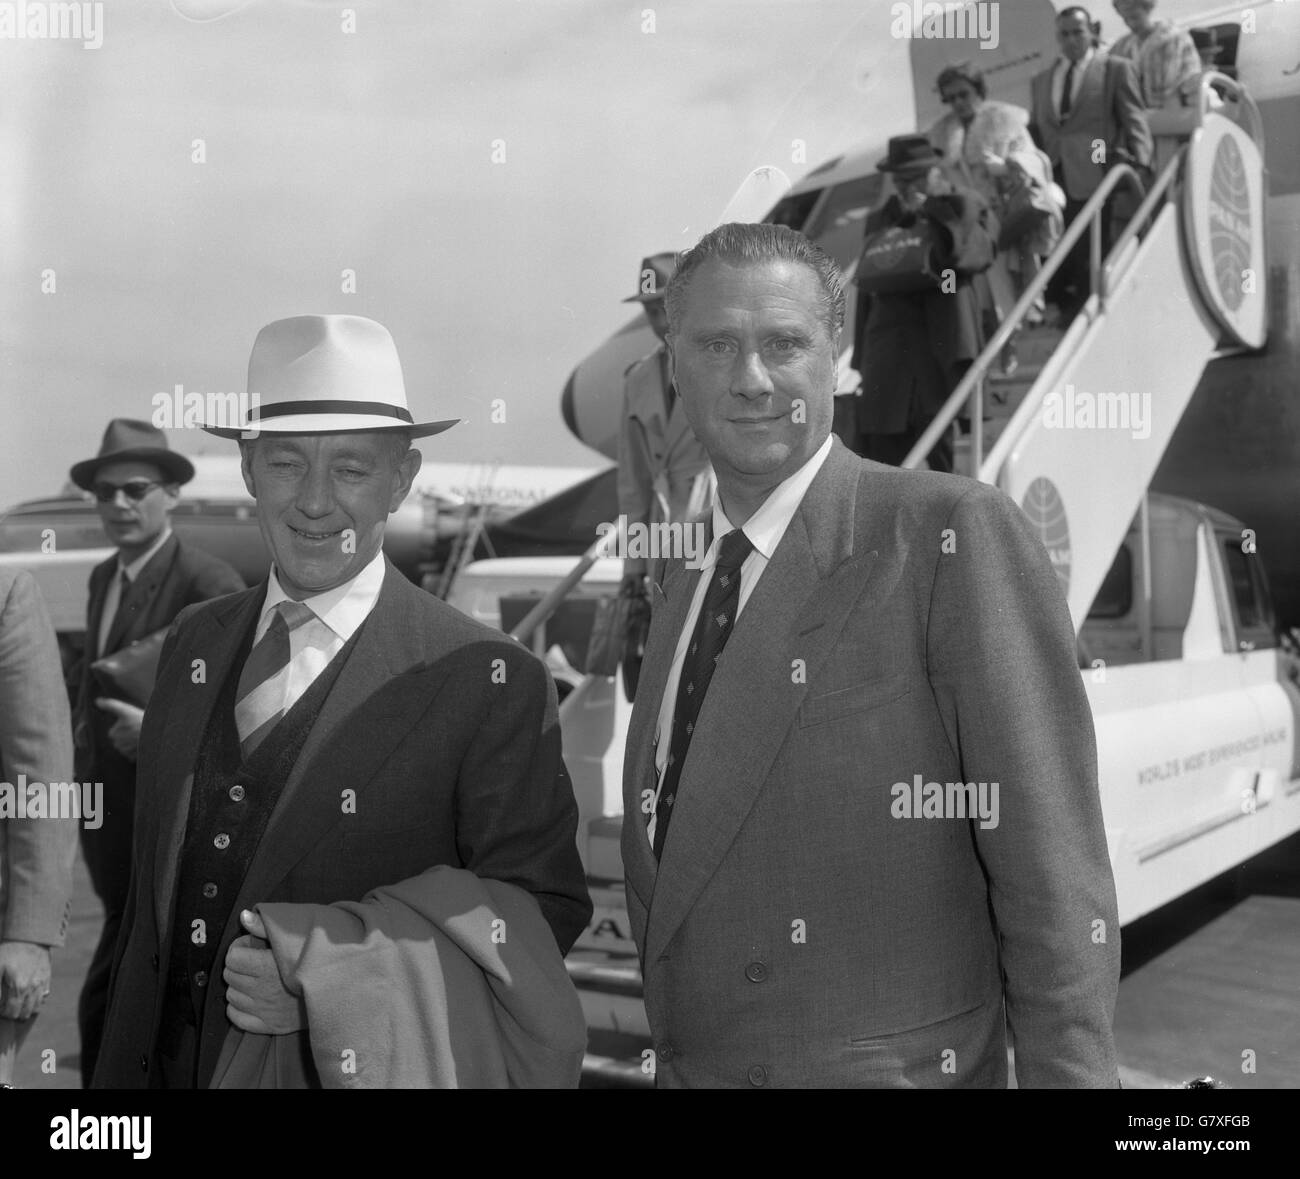 Sir Alec Guinness (l) and producer-director Sir Carol Reed arrived at London Airport from Havana after filming location scenes for 'Our Man in Havana', which is to be completed at Shepperton. Stock Photo